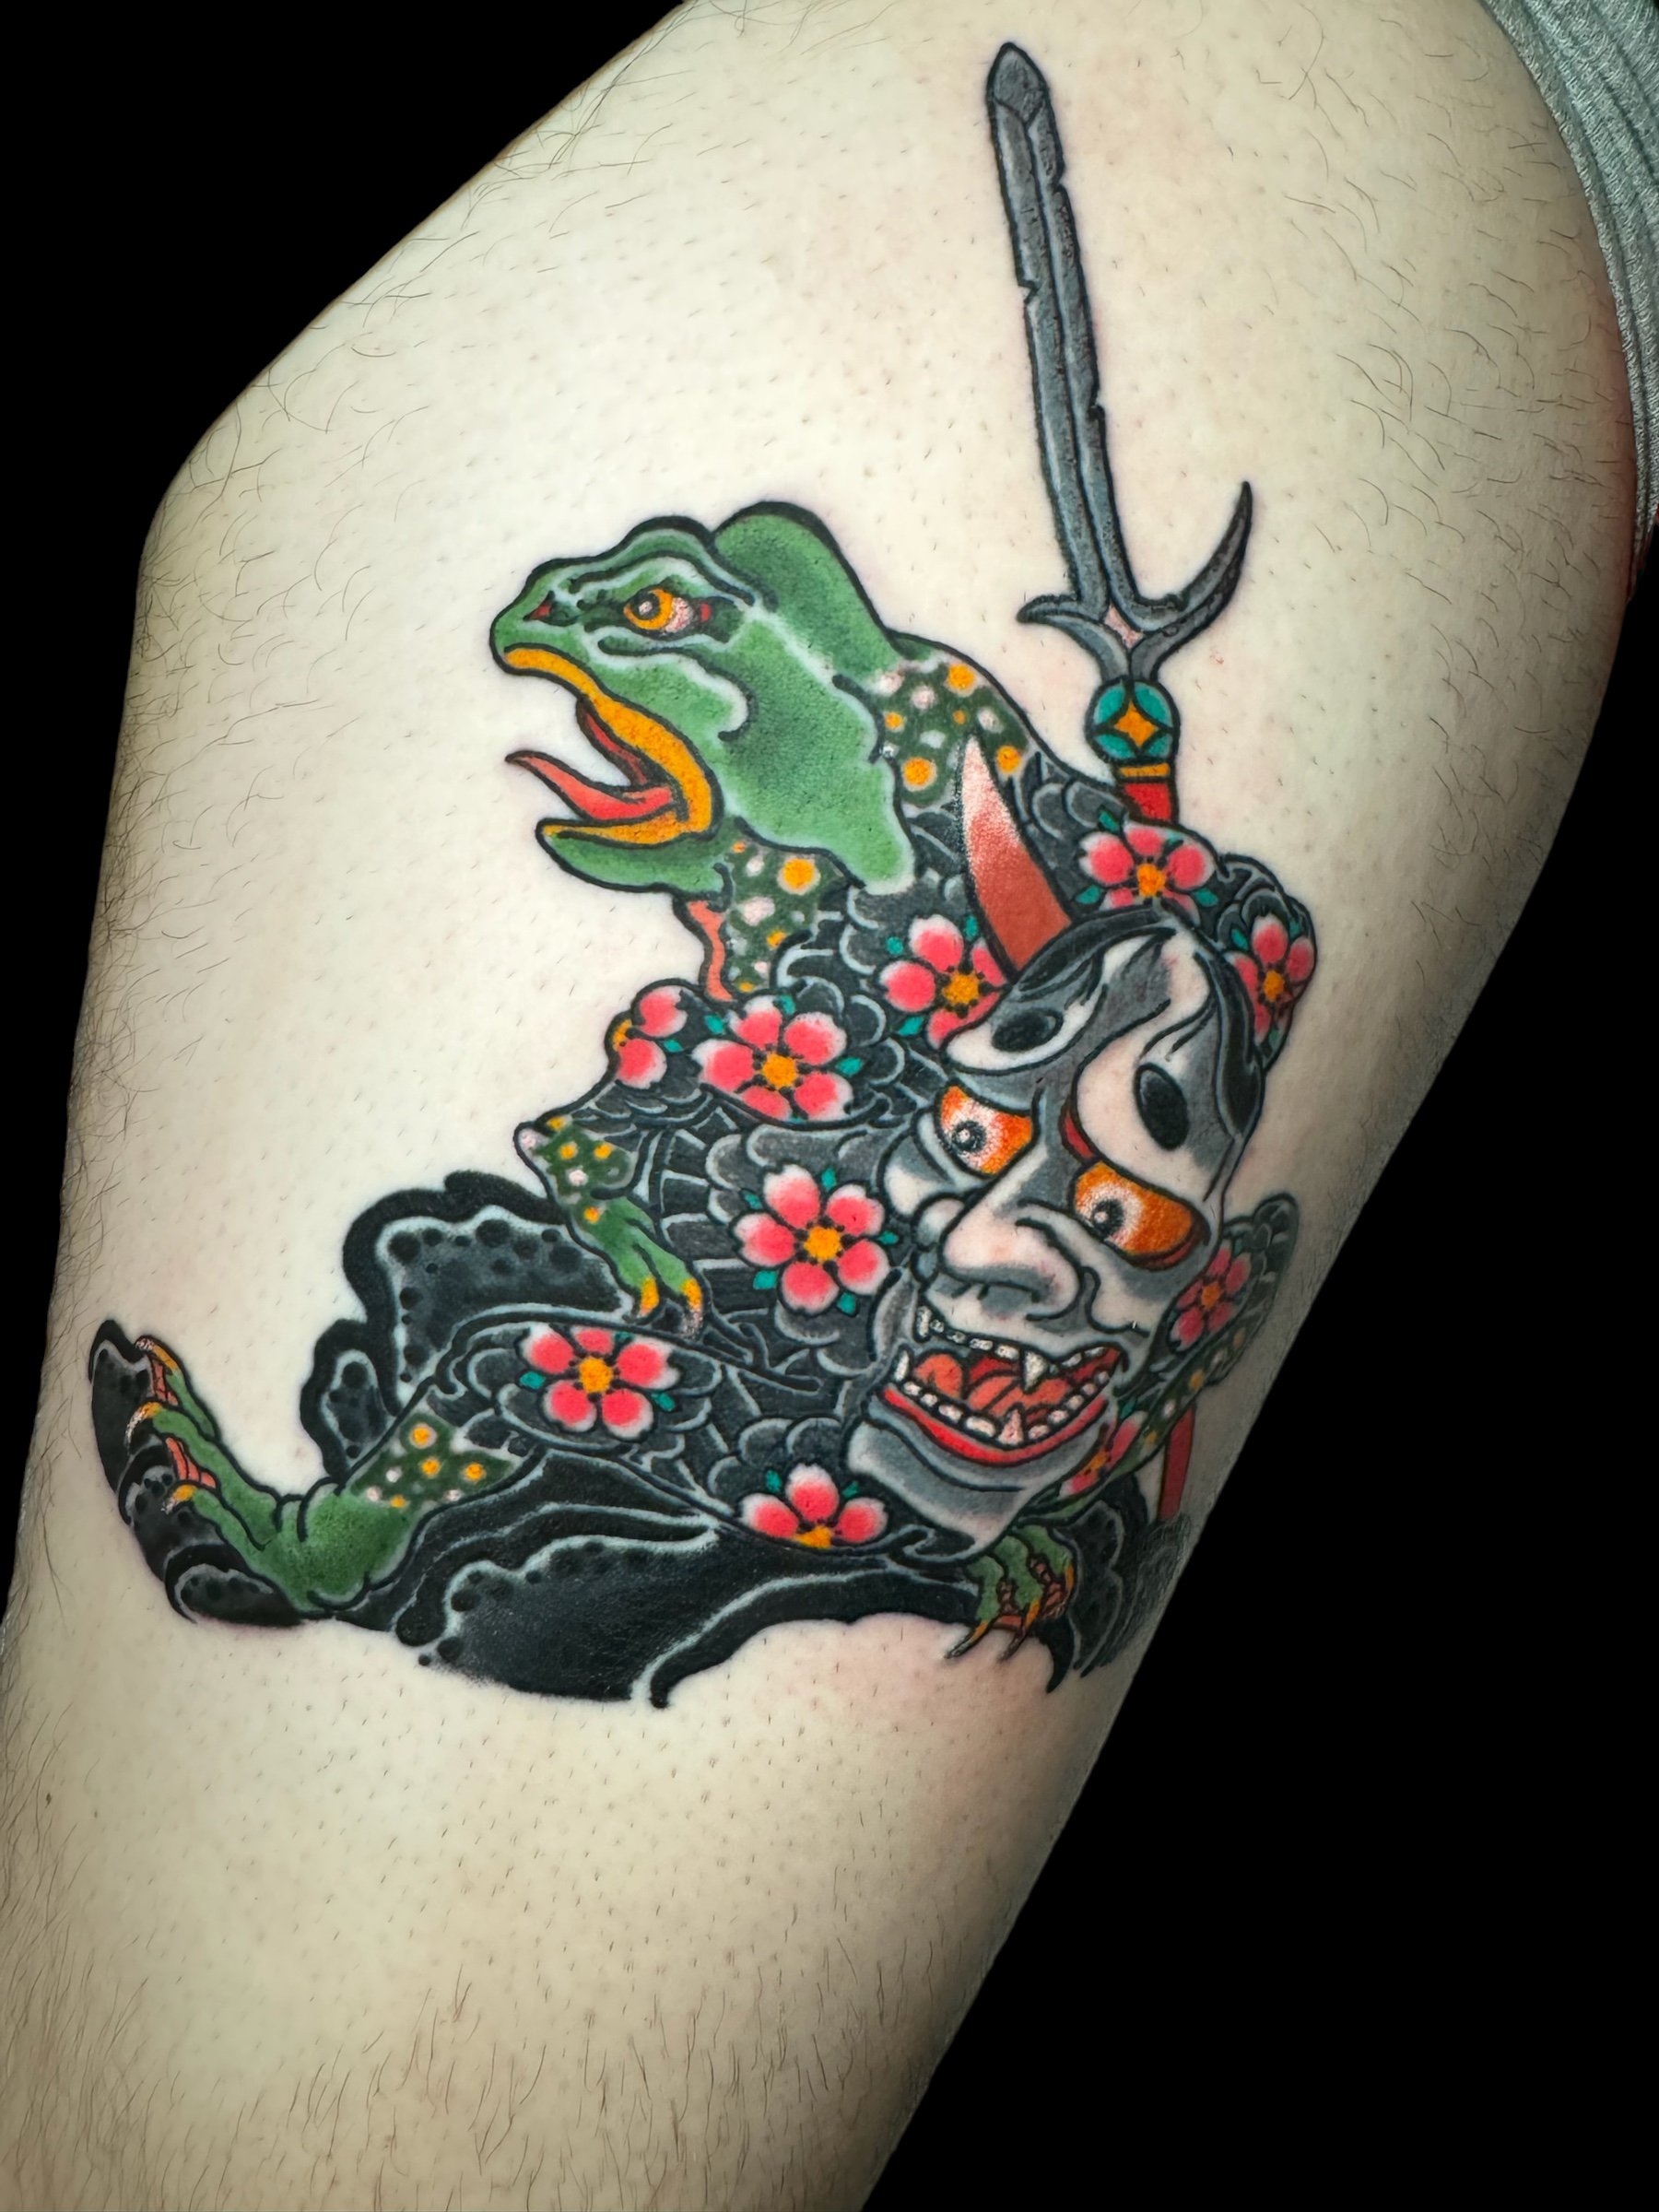 Frog tattoo located on the thigh.